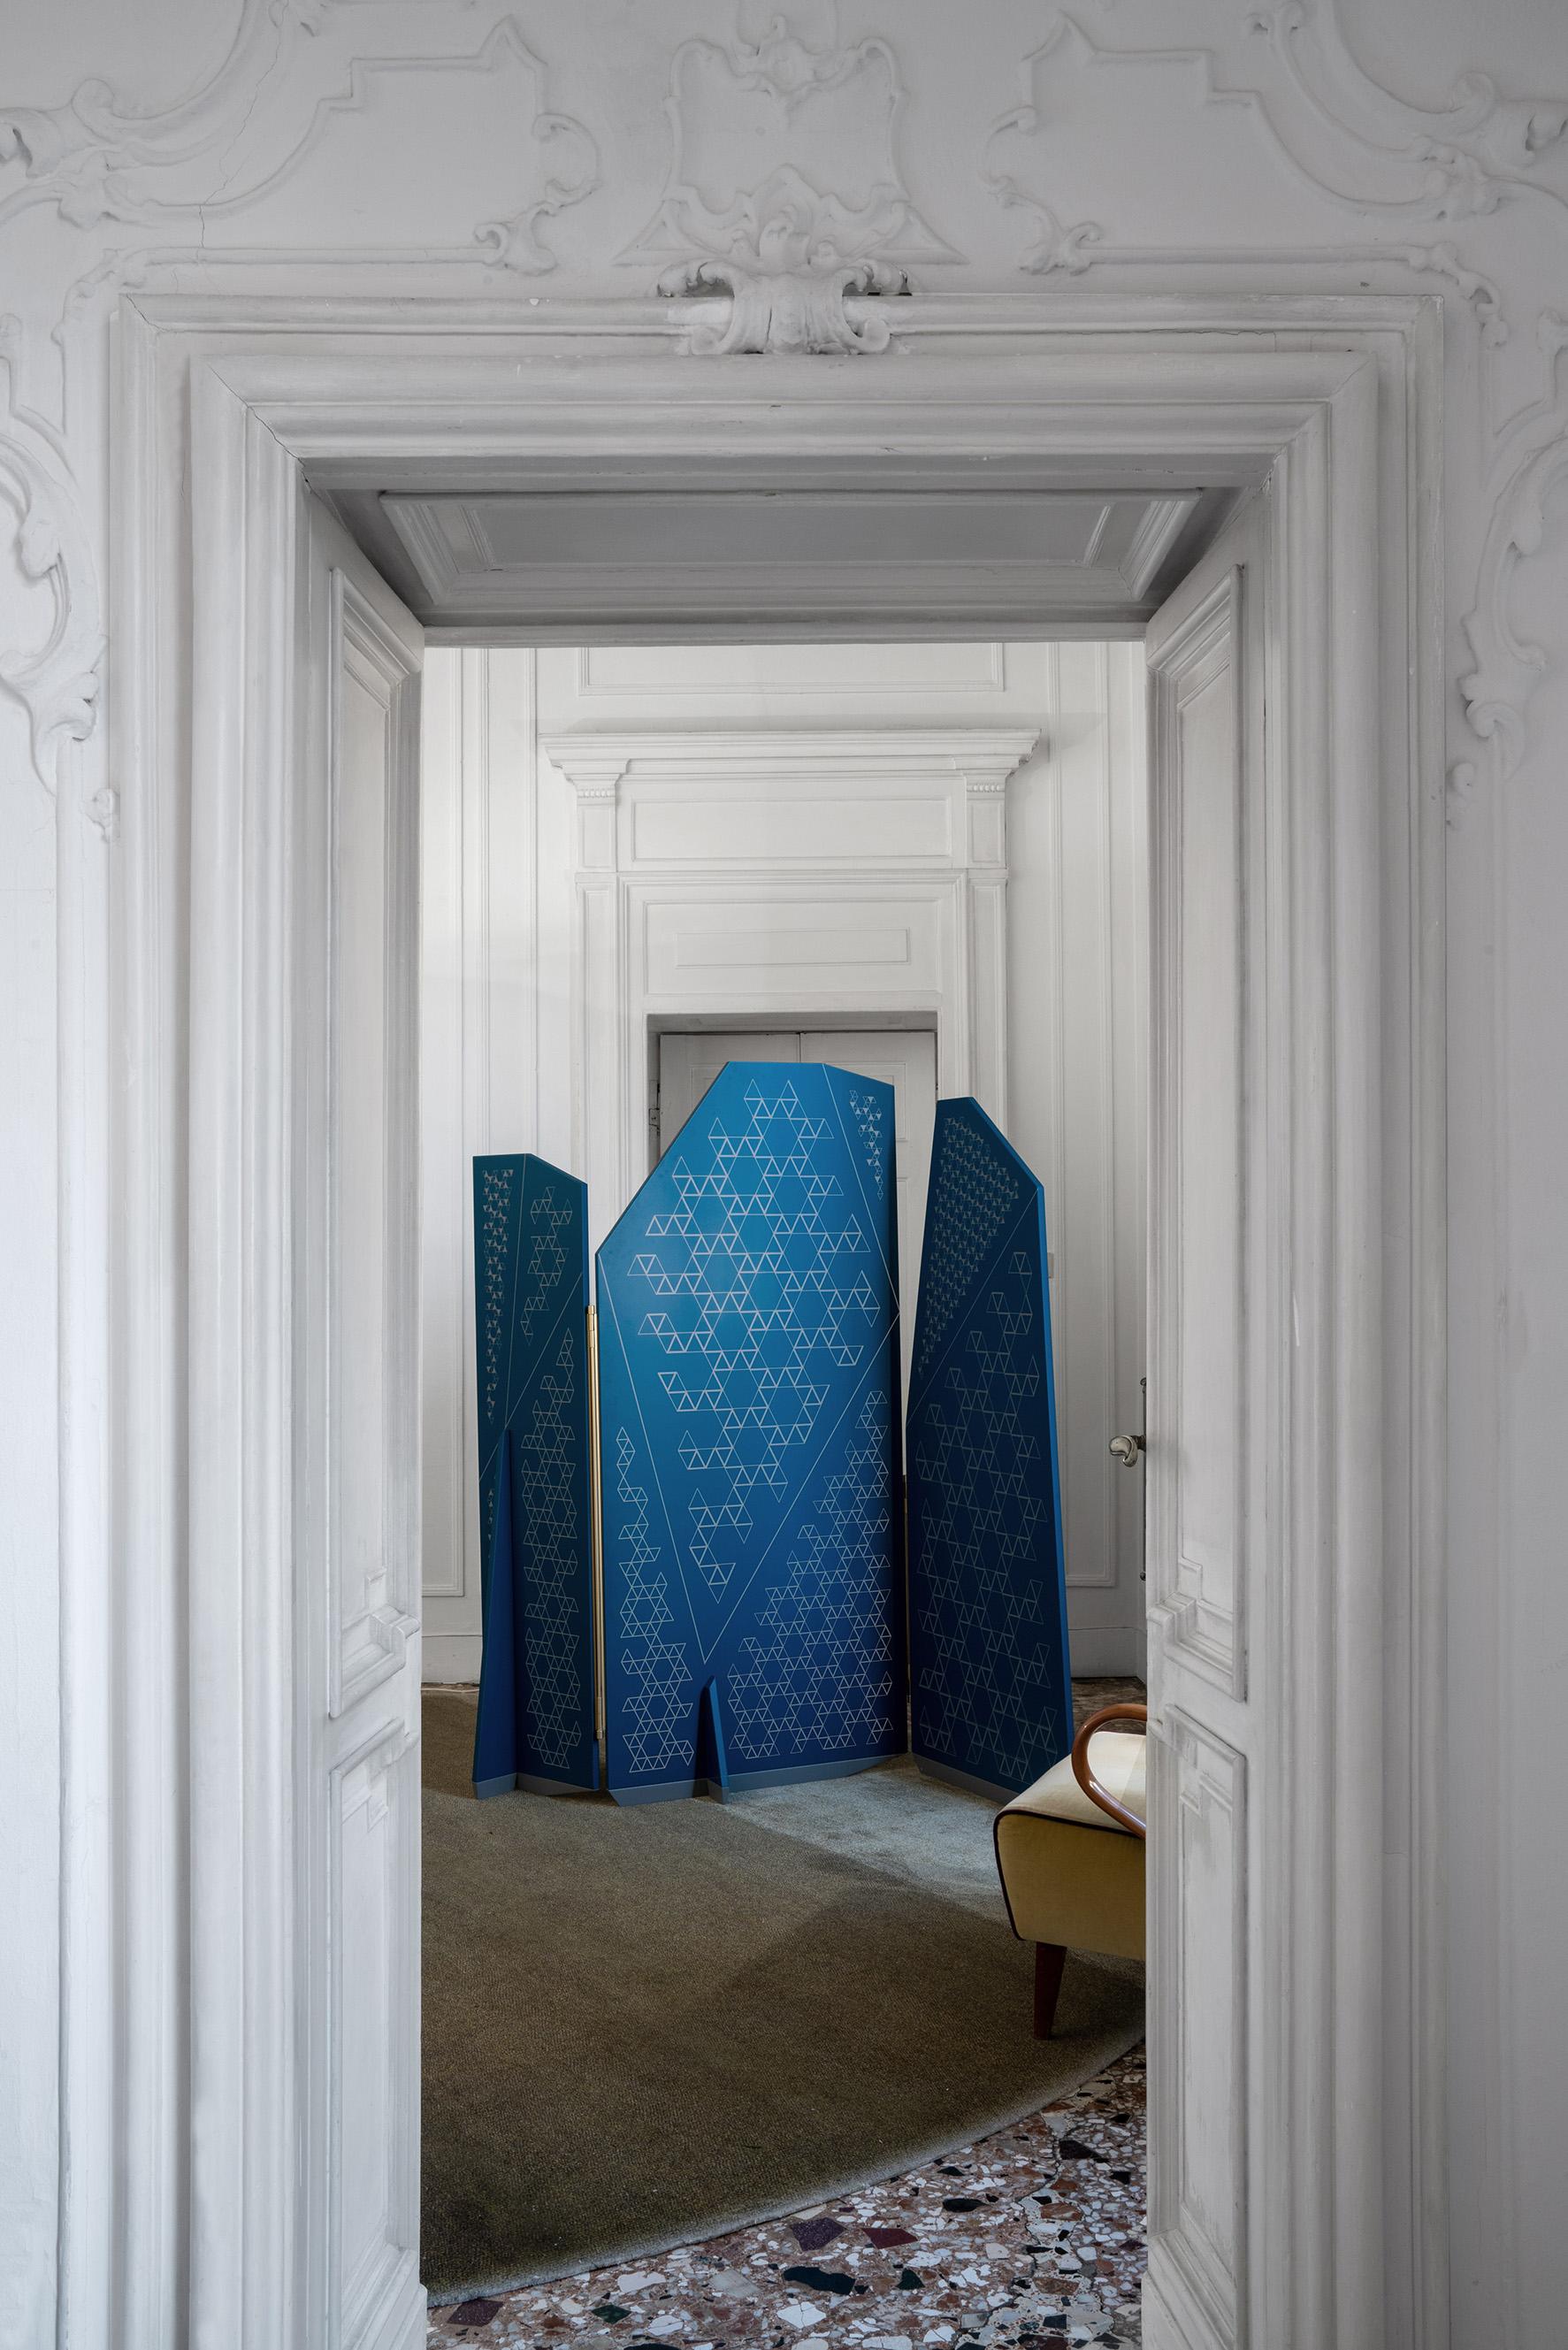 Pair of green teal blue screen by Mentemano.
Dimensions: W 196 x D 28 x H 181 cm.
Materials: green teal blue, grey print, black hinges.

The hinges allow the structure to take different shapes.
The lacquered panels are enriched with digital